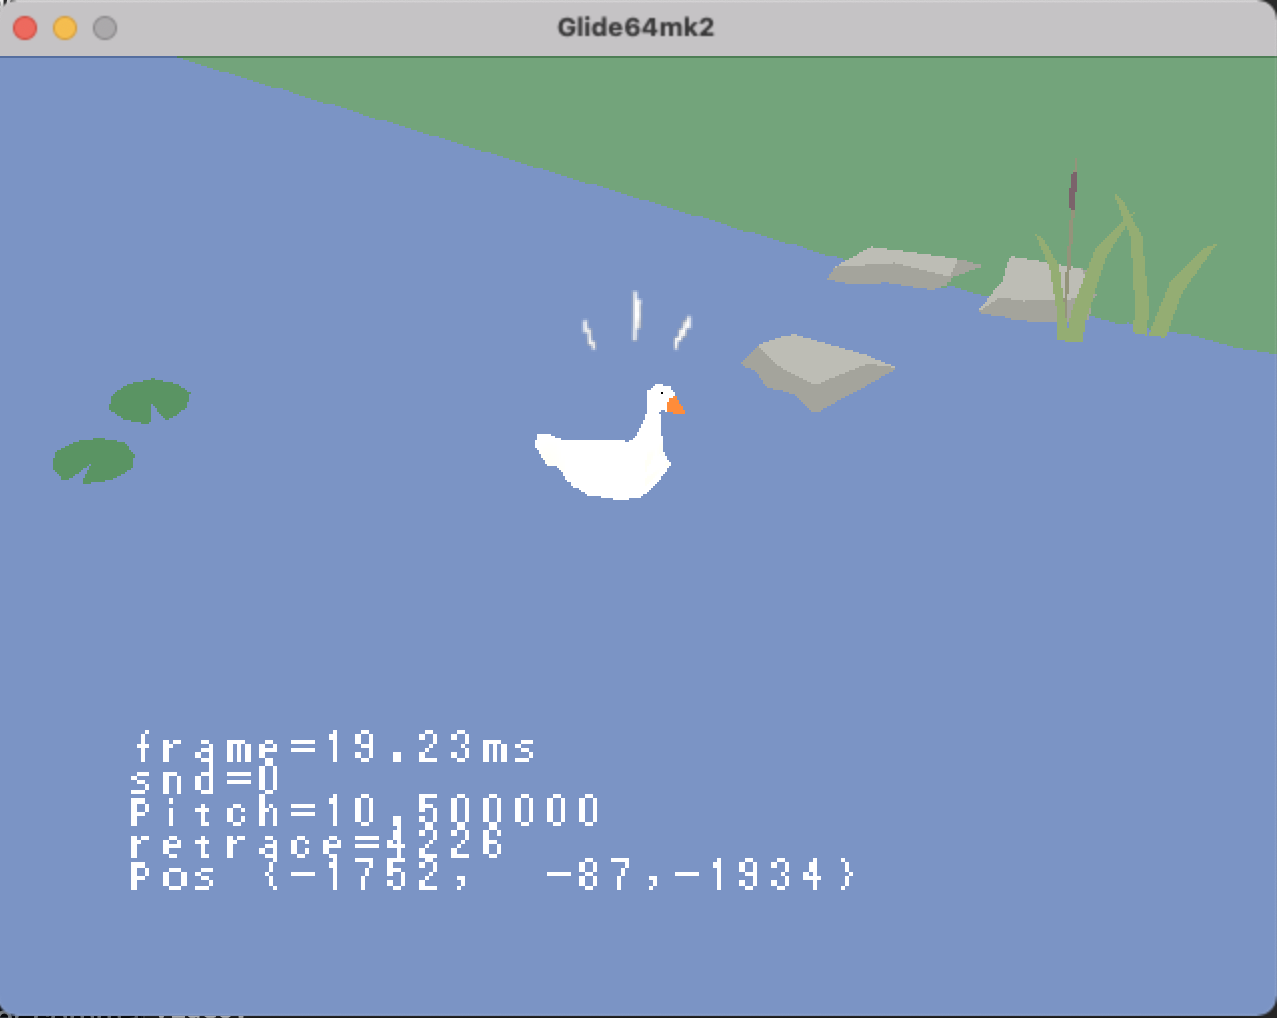 screenshot of the goose in the lake in the game running on the mupen64plus emulator